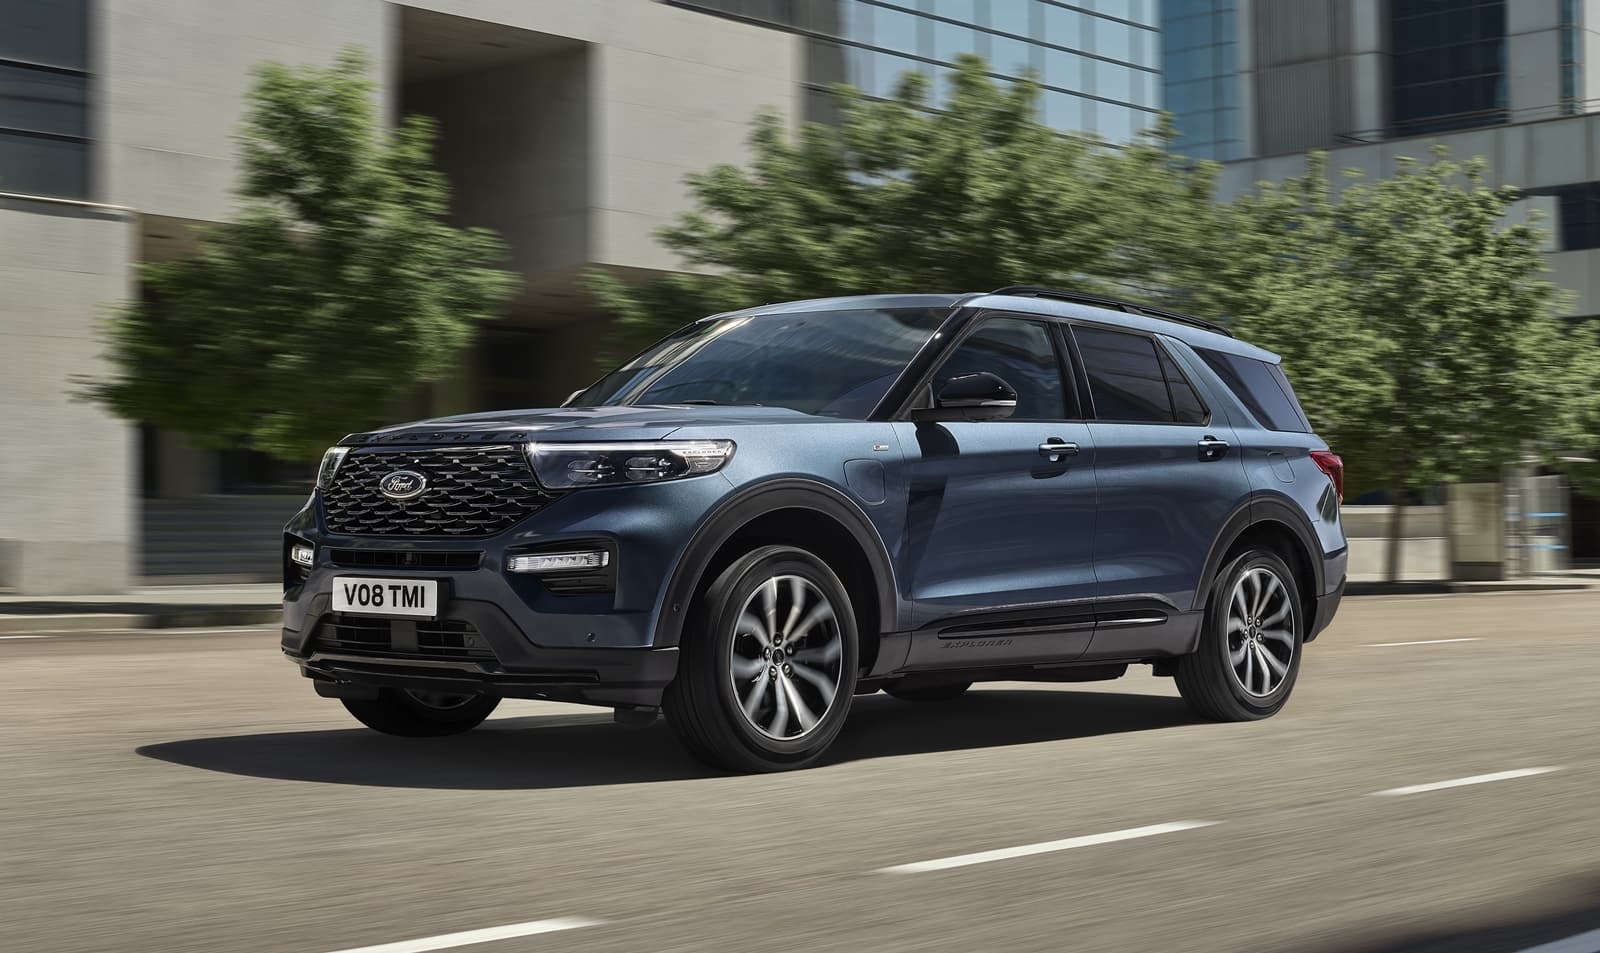 The new Ford Explorer 2021 is now on sale and returns more imposing